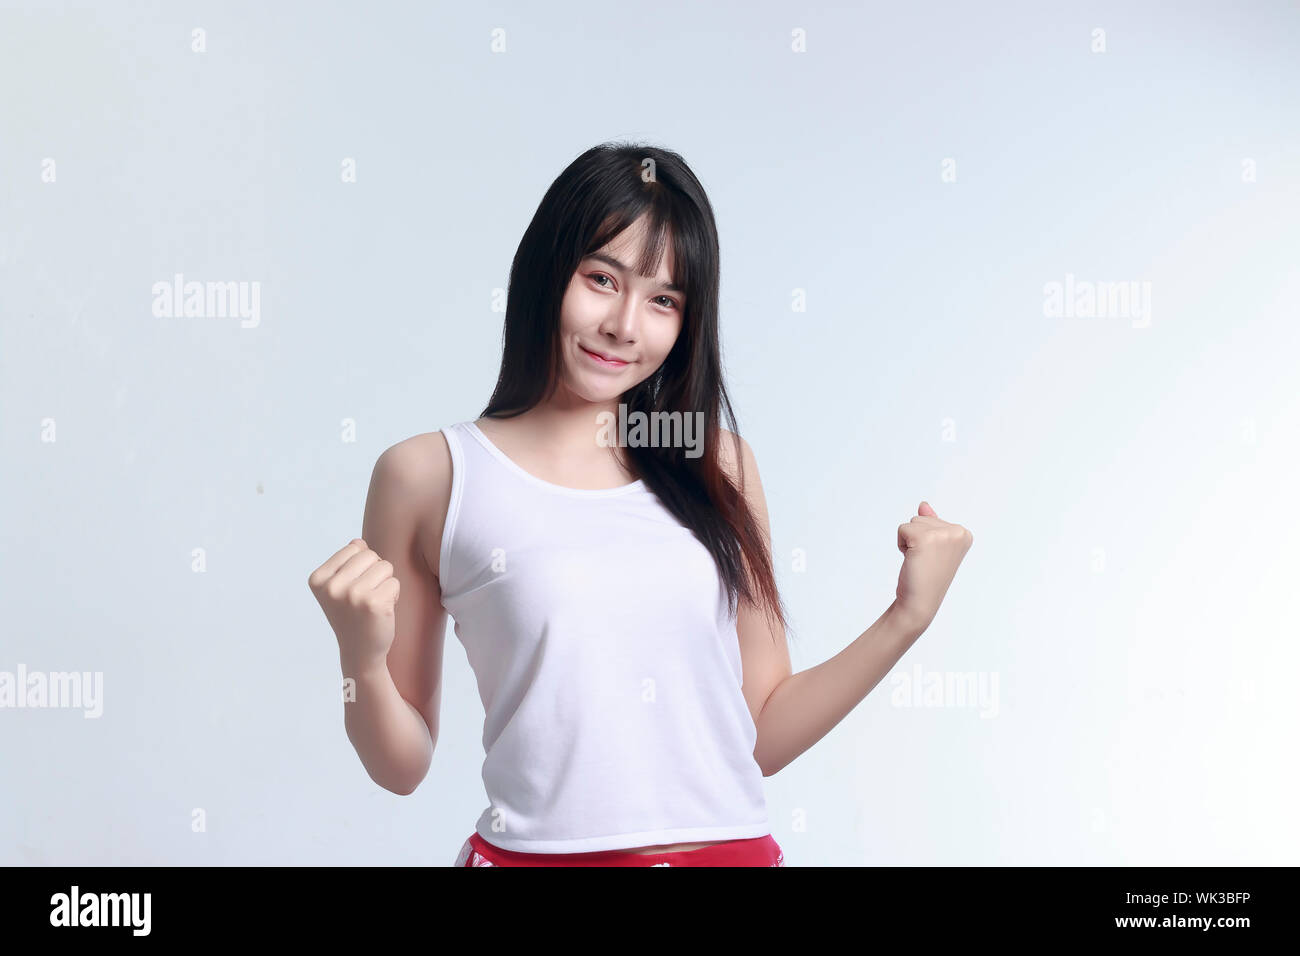 Portrait Of Woman Clenching Fist Against White Background Stock Photo